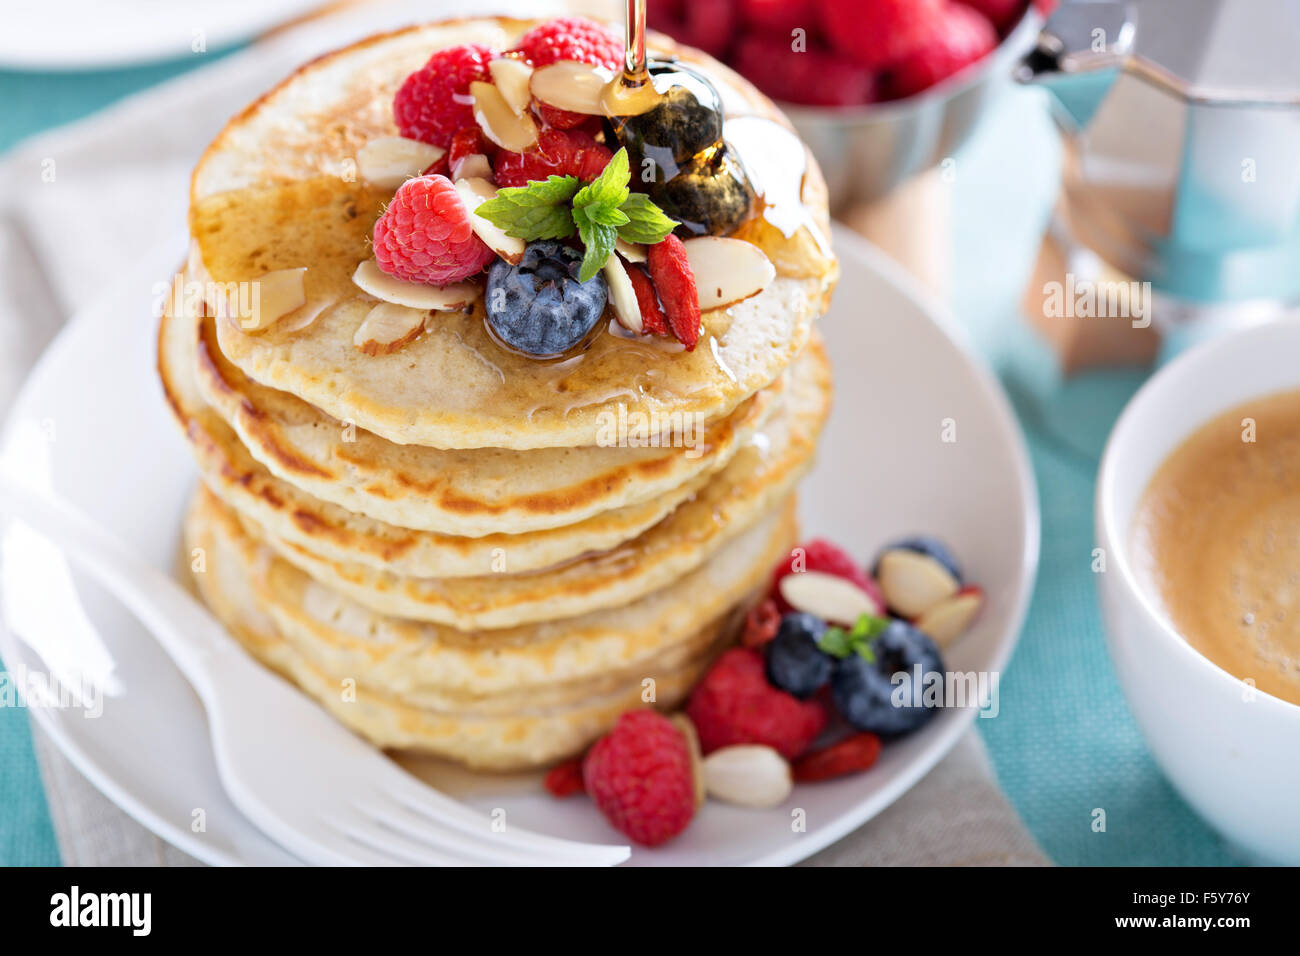 Fluffy oatmeal pancakes stack with fresh berries, coffee and syrup Stock Photo